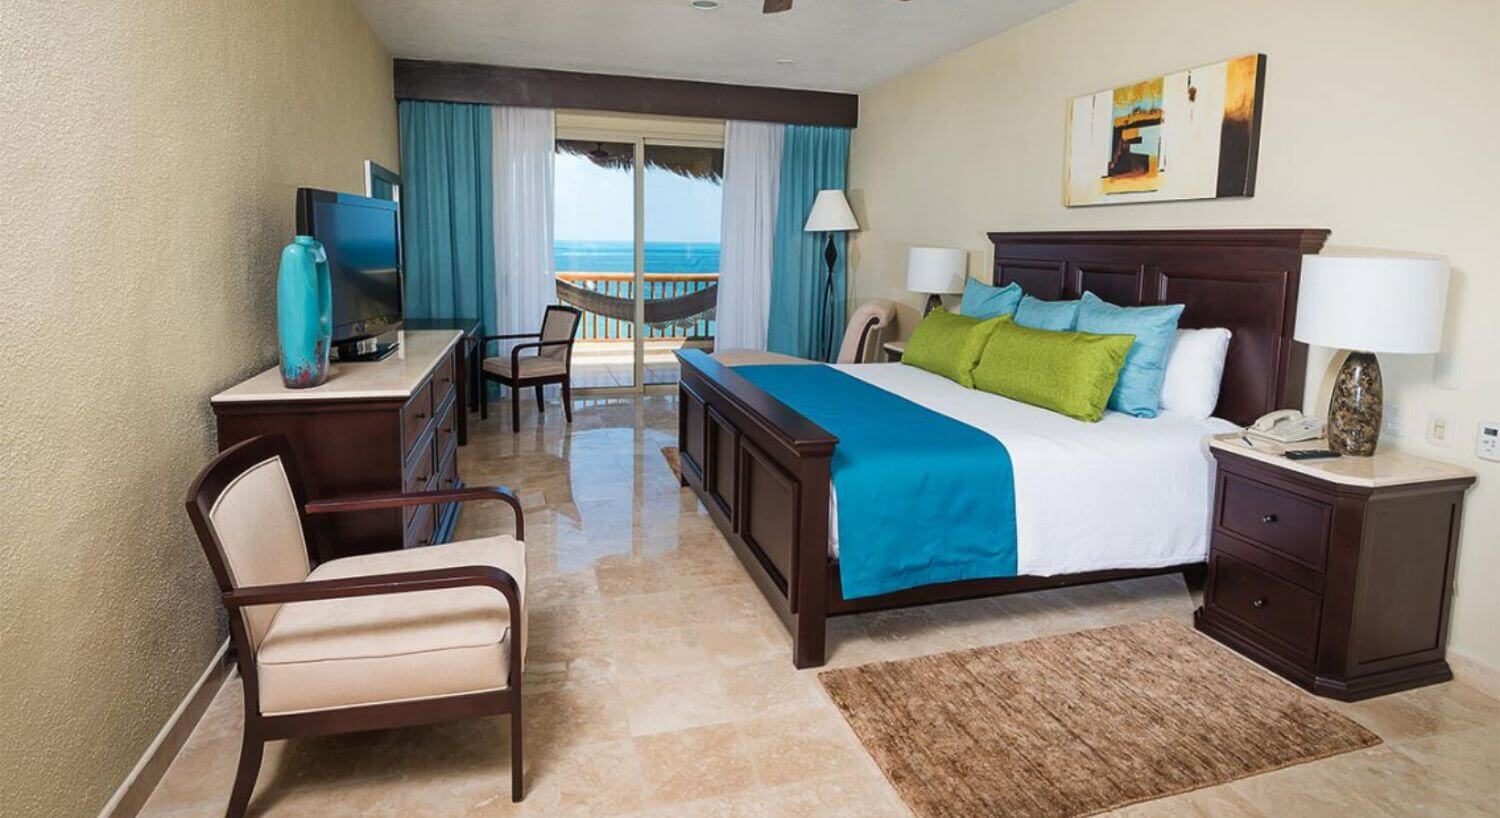 A bedroom with a King bed with white, blue and green bedding, deep wood headboard and footboard, nightstands with lamps, a dresser with TV an armchair, a desk and chair, and sliding doors that open to a terrace with hammock and ocean views.